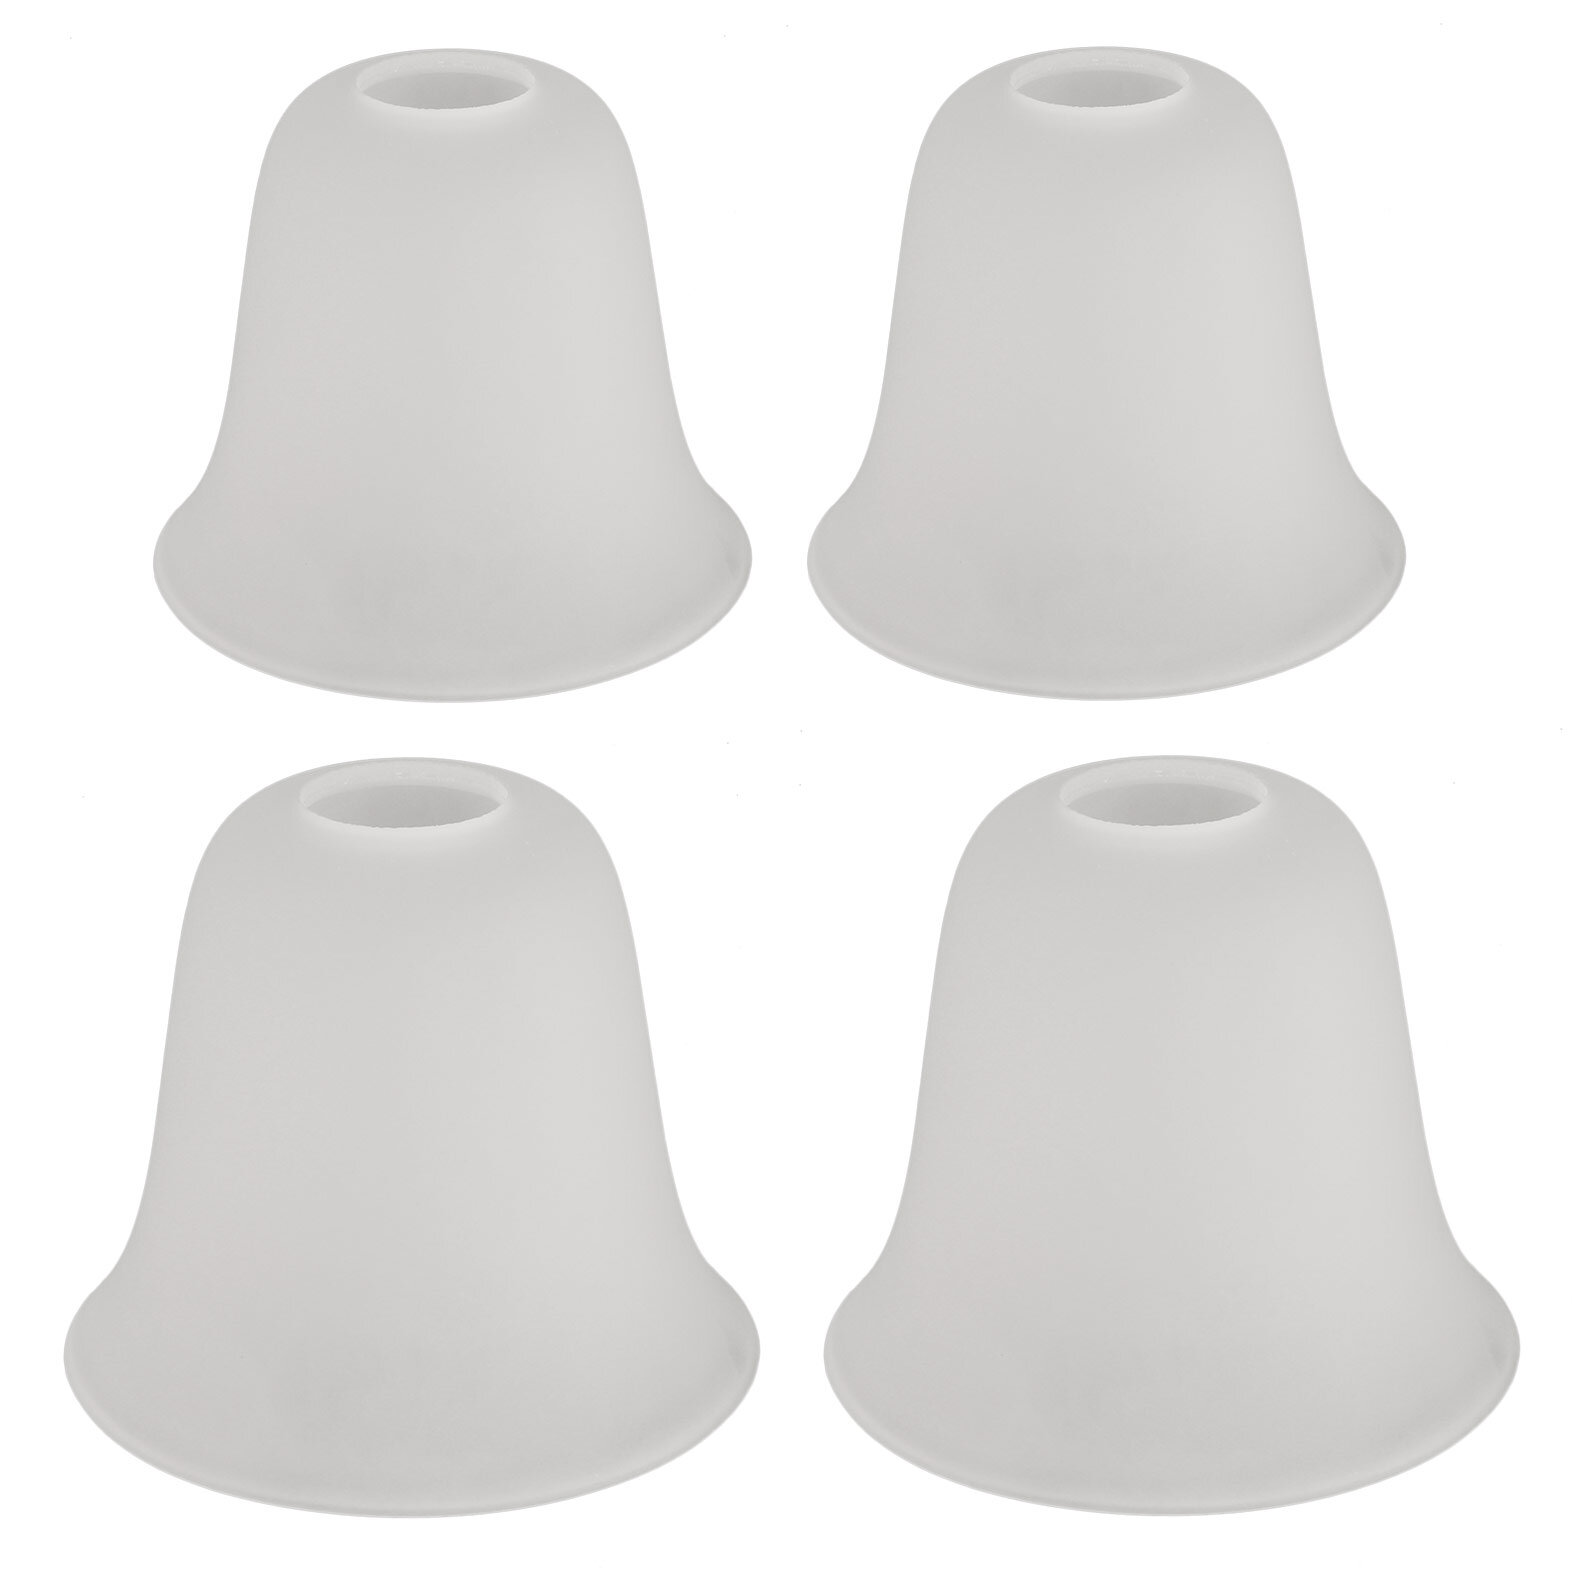 SET OF 3 CEILING FAN REPLACEMENT White frosted GLASS LIGHT GLOBES 